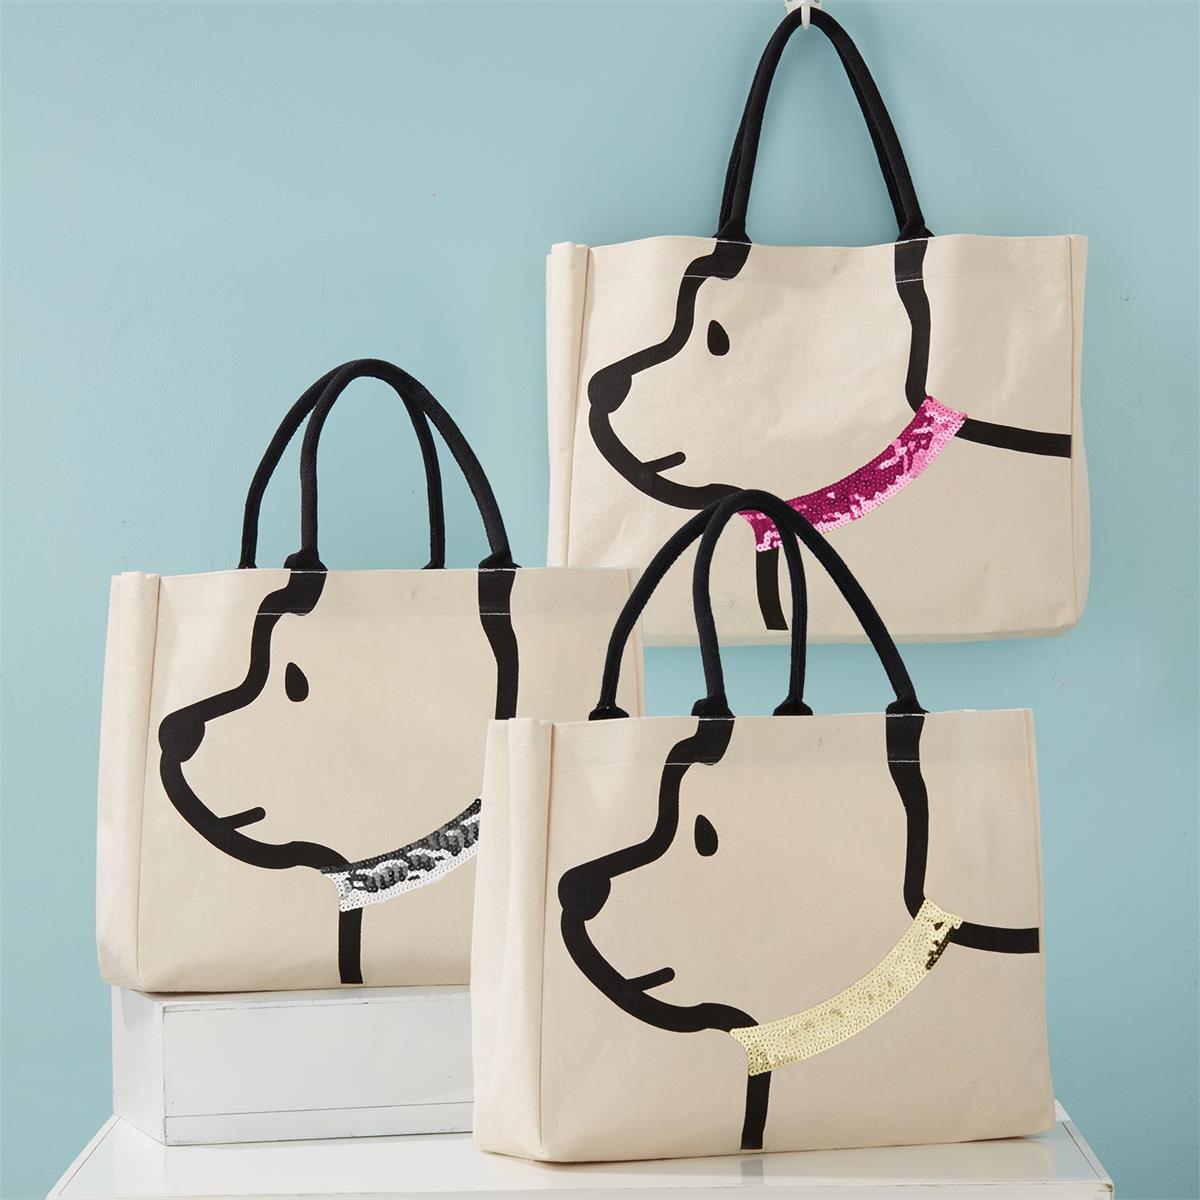 Best Friend Dog with Sequin Collar Tote bag- 3 colors